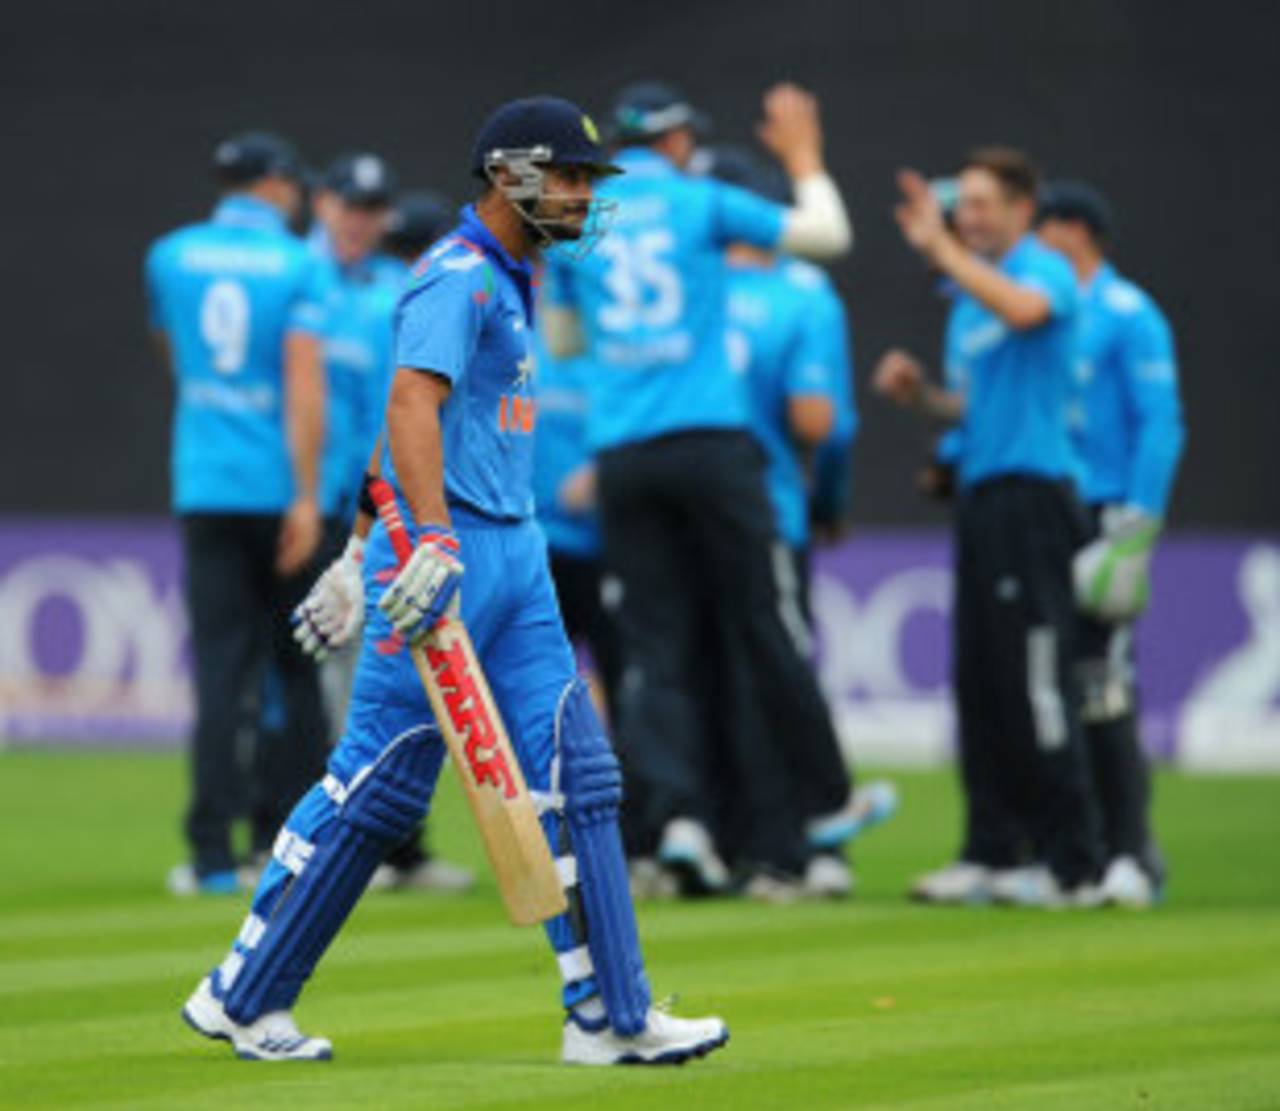 Virat Kohli's woes continued as he was out for a duck, 2nd ODI, England v India, Cardiff, August 27, 2014